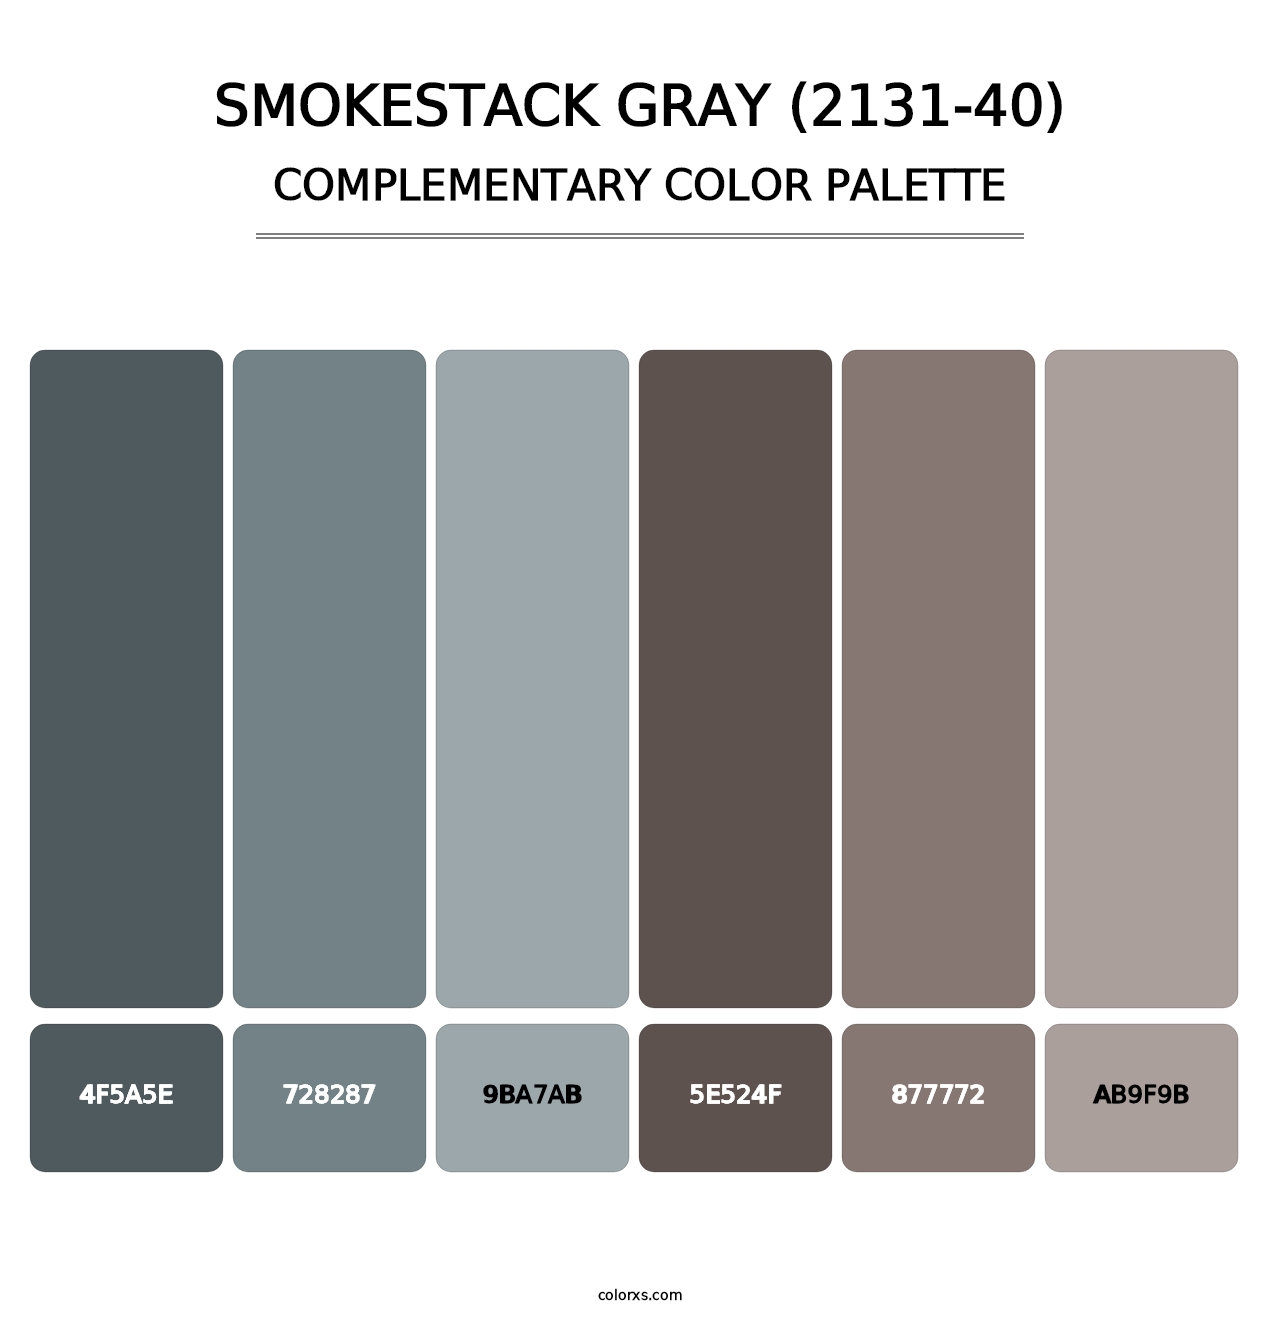 Smokestack Gray (2131-40) - Complementary Color Palette